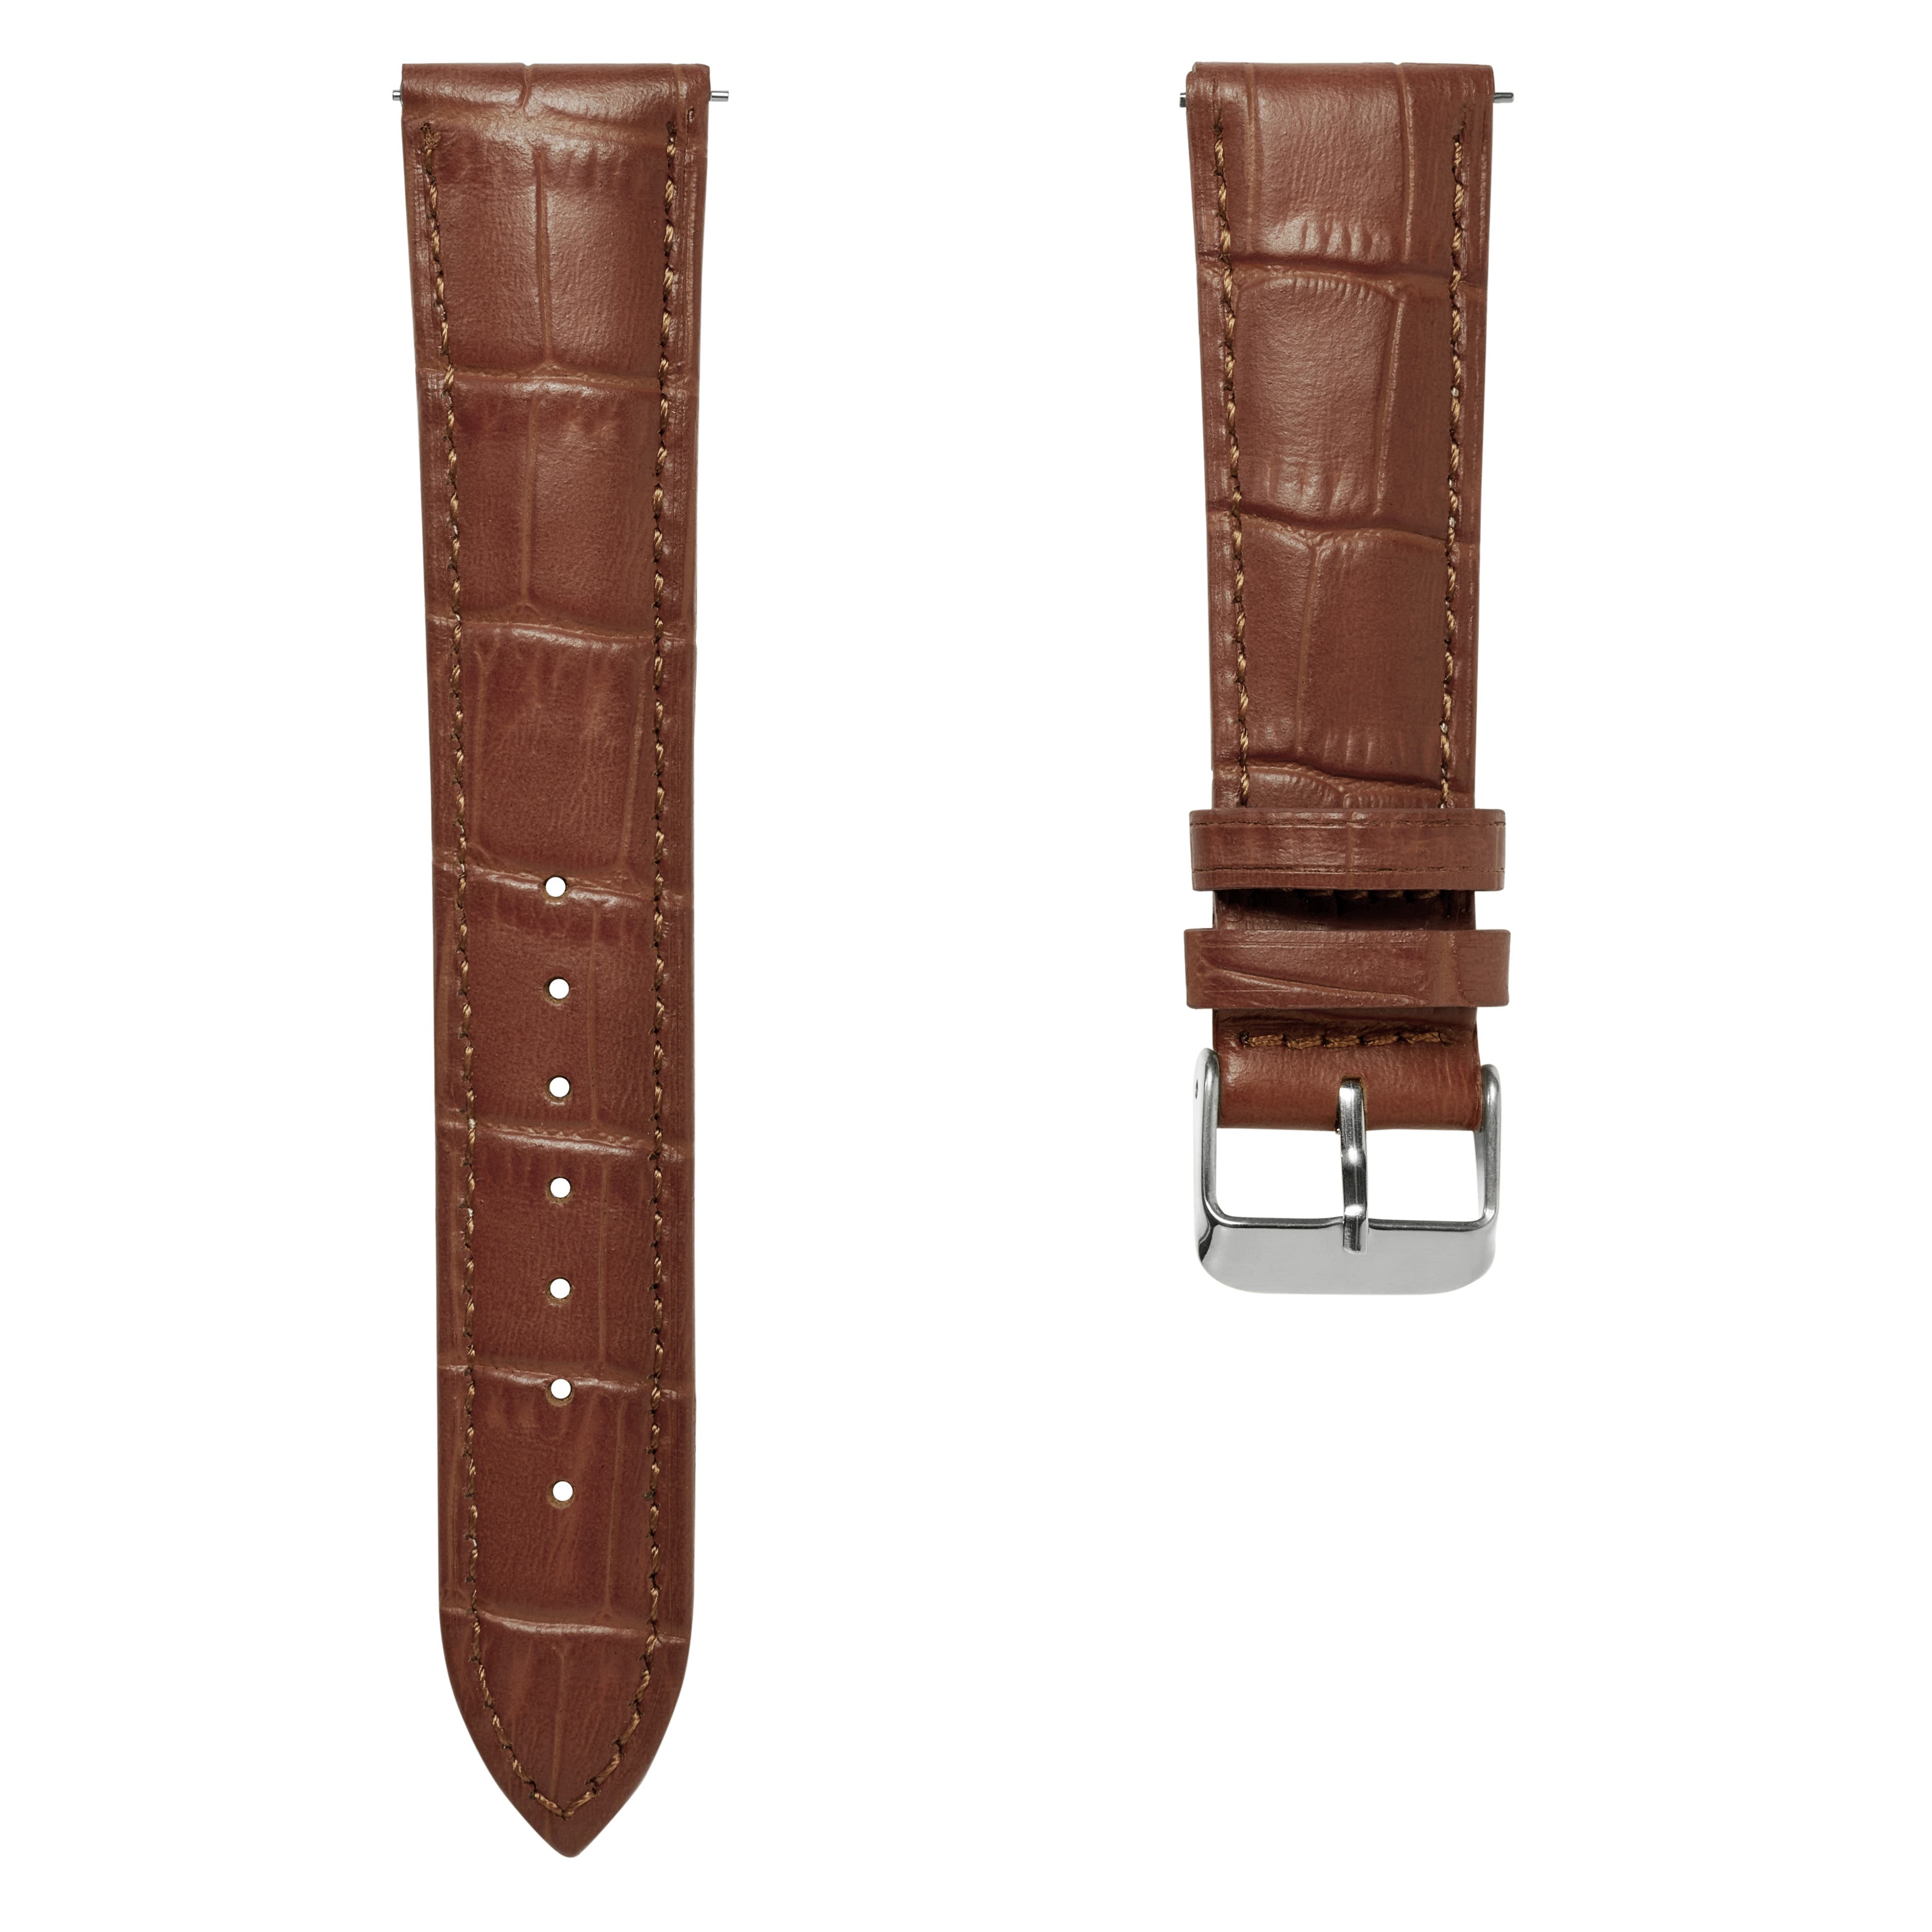 18mm Crocodile-Embossed Tan Leather Watch Strap with Silver-Tone Buckle – Quick Release